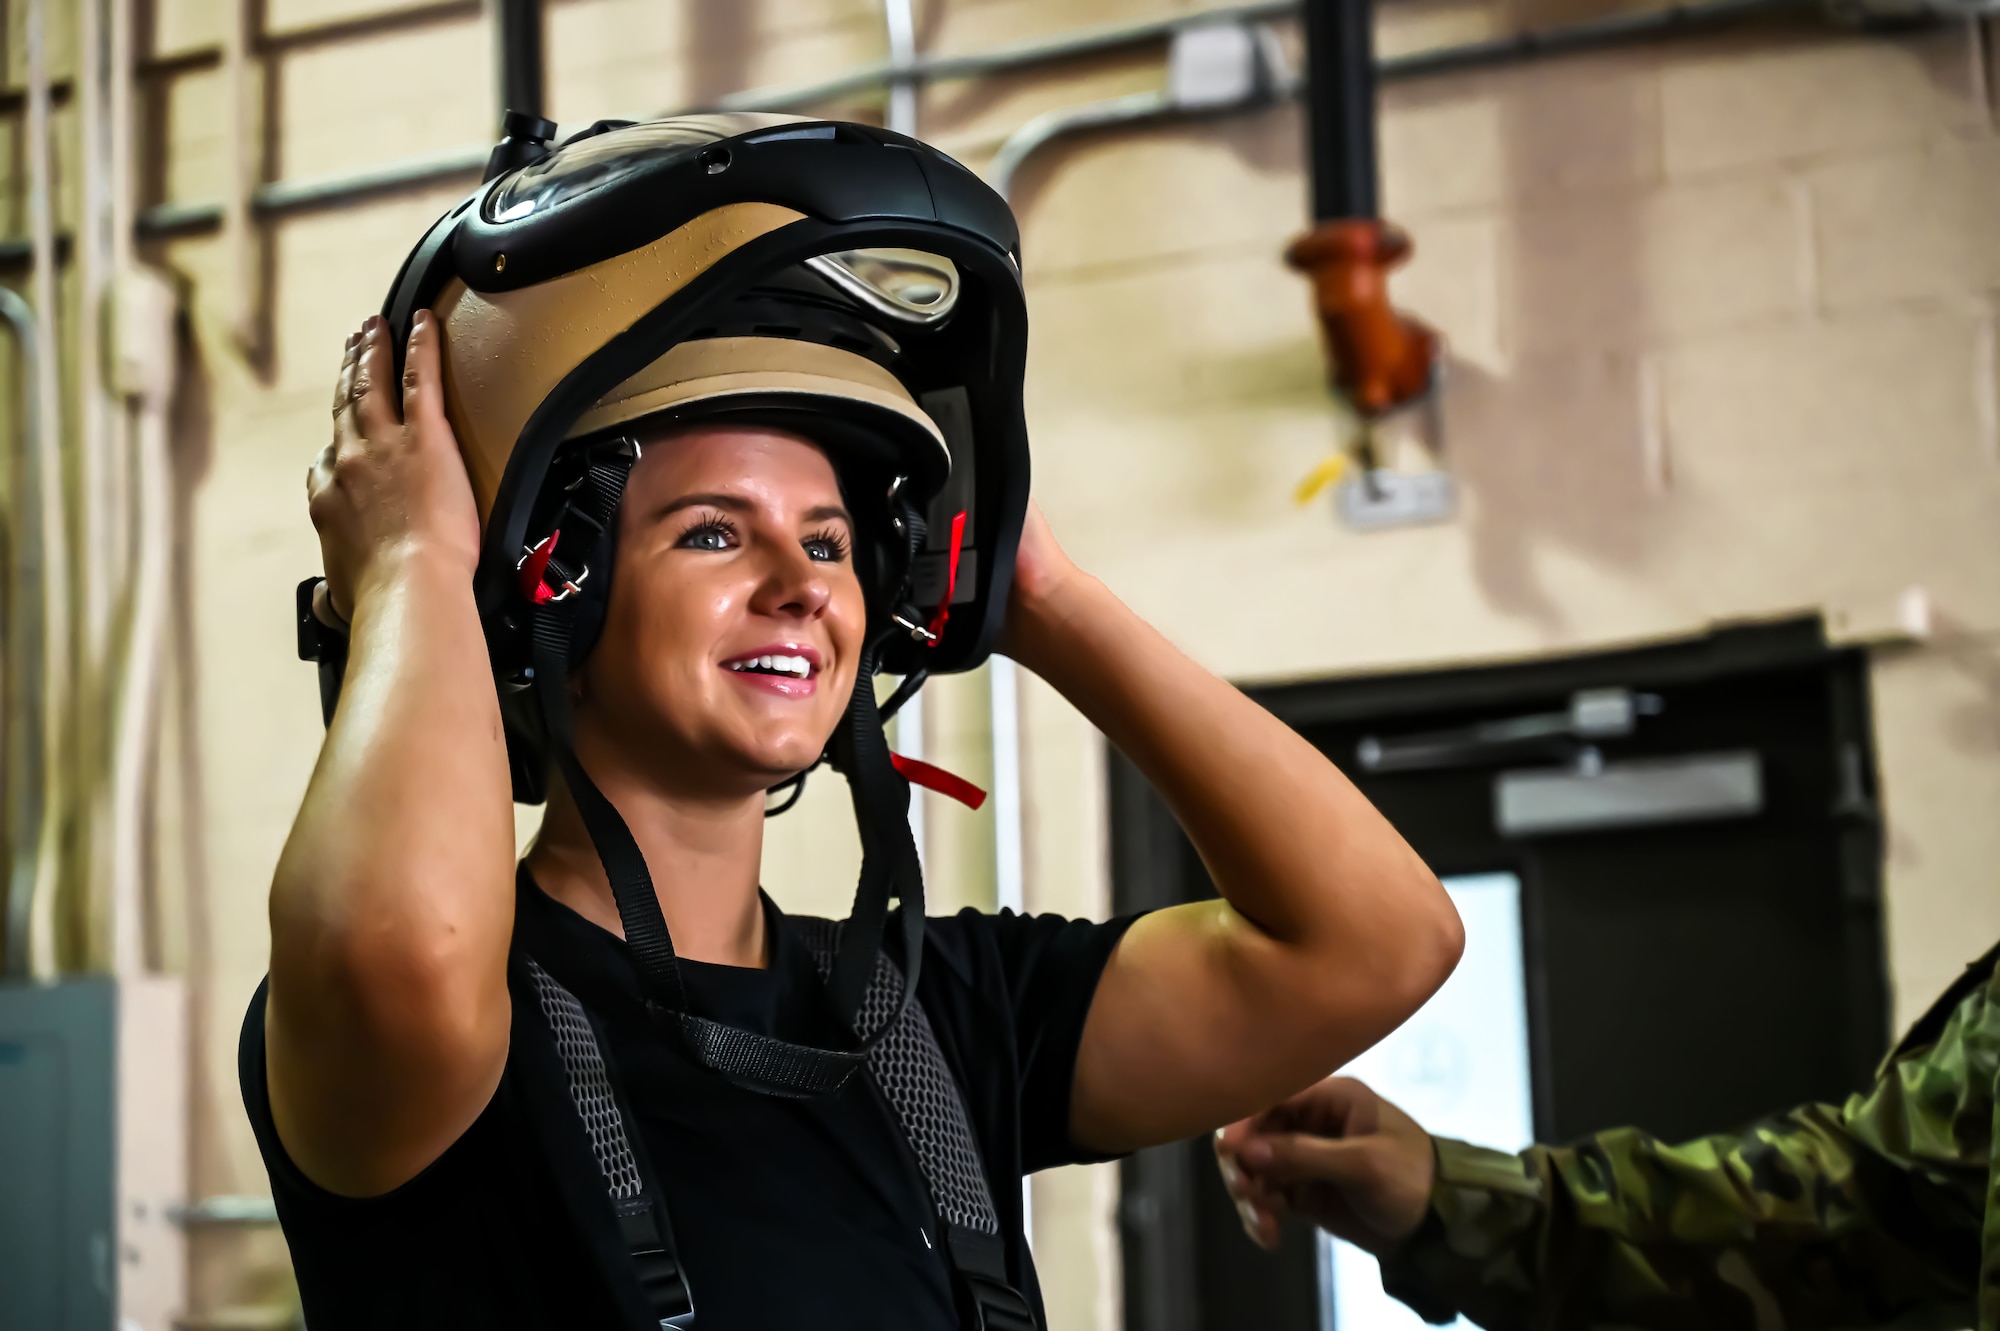 Formula Drift driver Amanda Sorenson puts on a bomb disposal suit helmet during a demo at Joint Base McGuire-Dix-Lakehurst on June 7, 2022. Drift team duo Branden and Amanda Sorensen visited JB MDL to interact with Airmen and learn about different Air Force career fields. Air Force Recruiting Service recently continued their 13-year partnership with the Formula Drift series. Throughout the 2022 Formula Drift circuit, the Air Force will serve as the primary sponsor for the Sorensen Motorsports team.